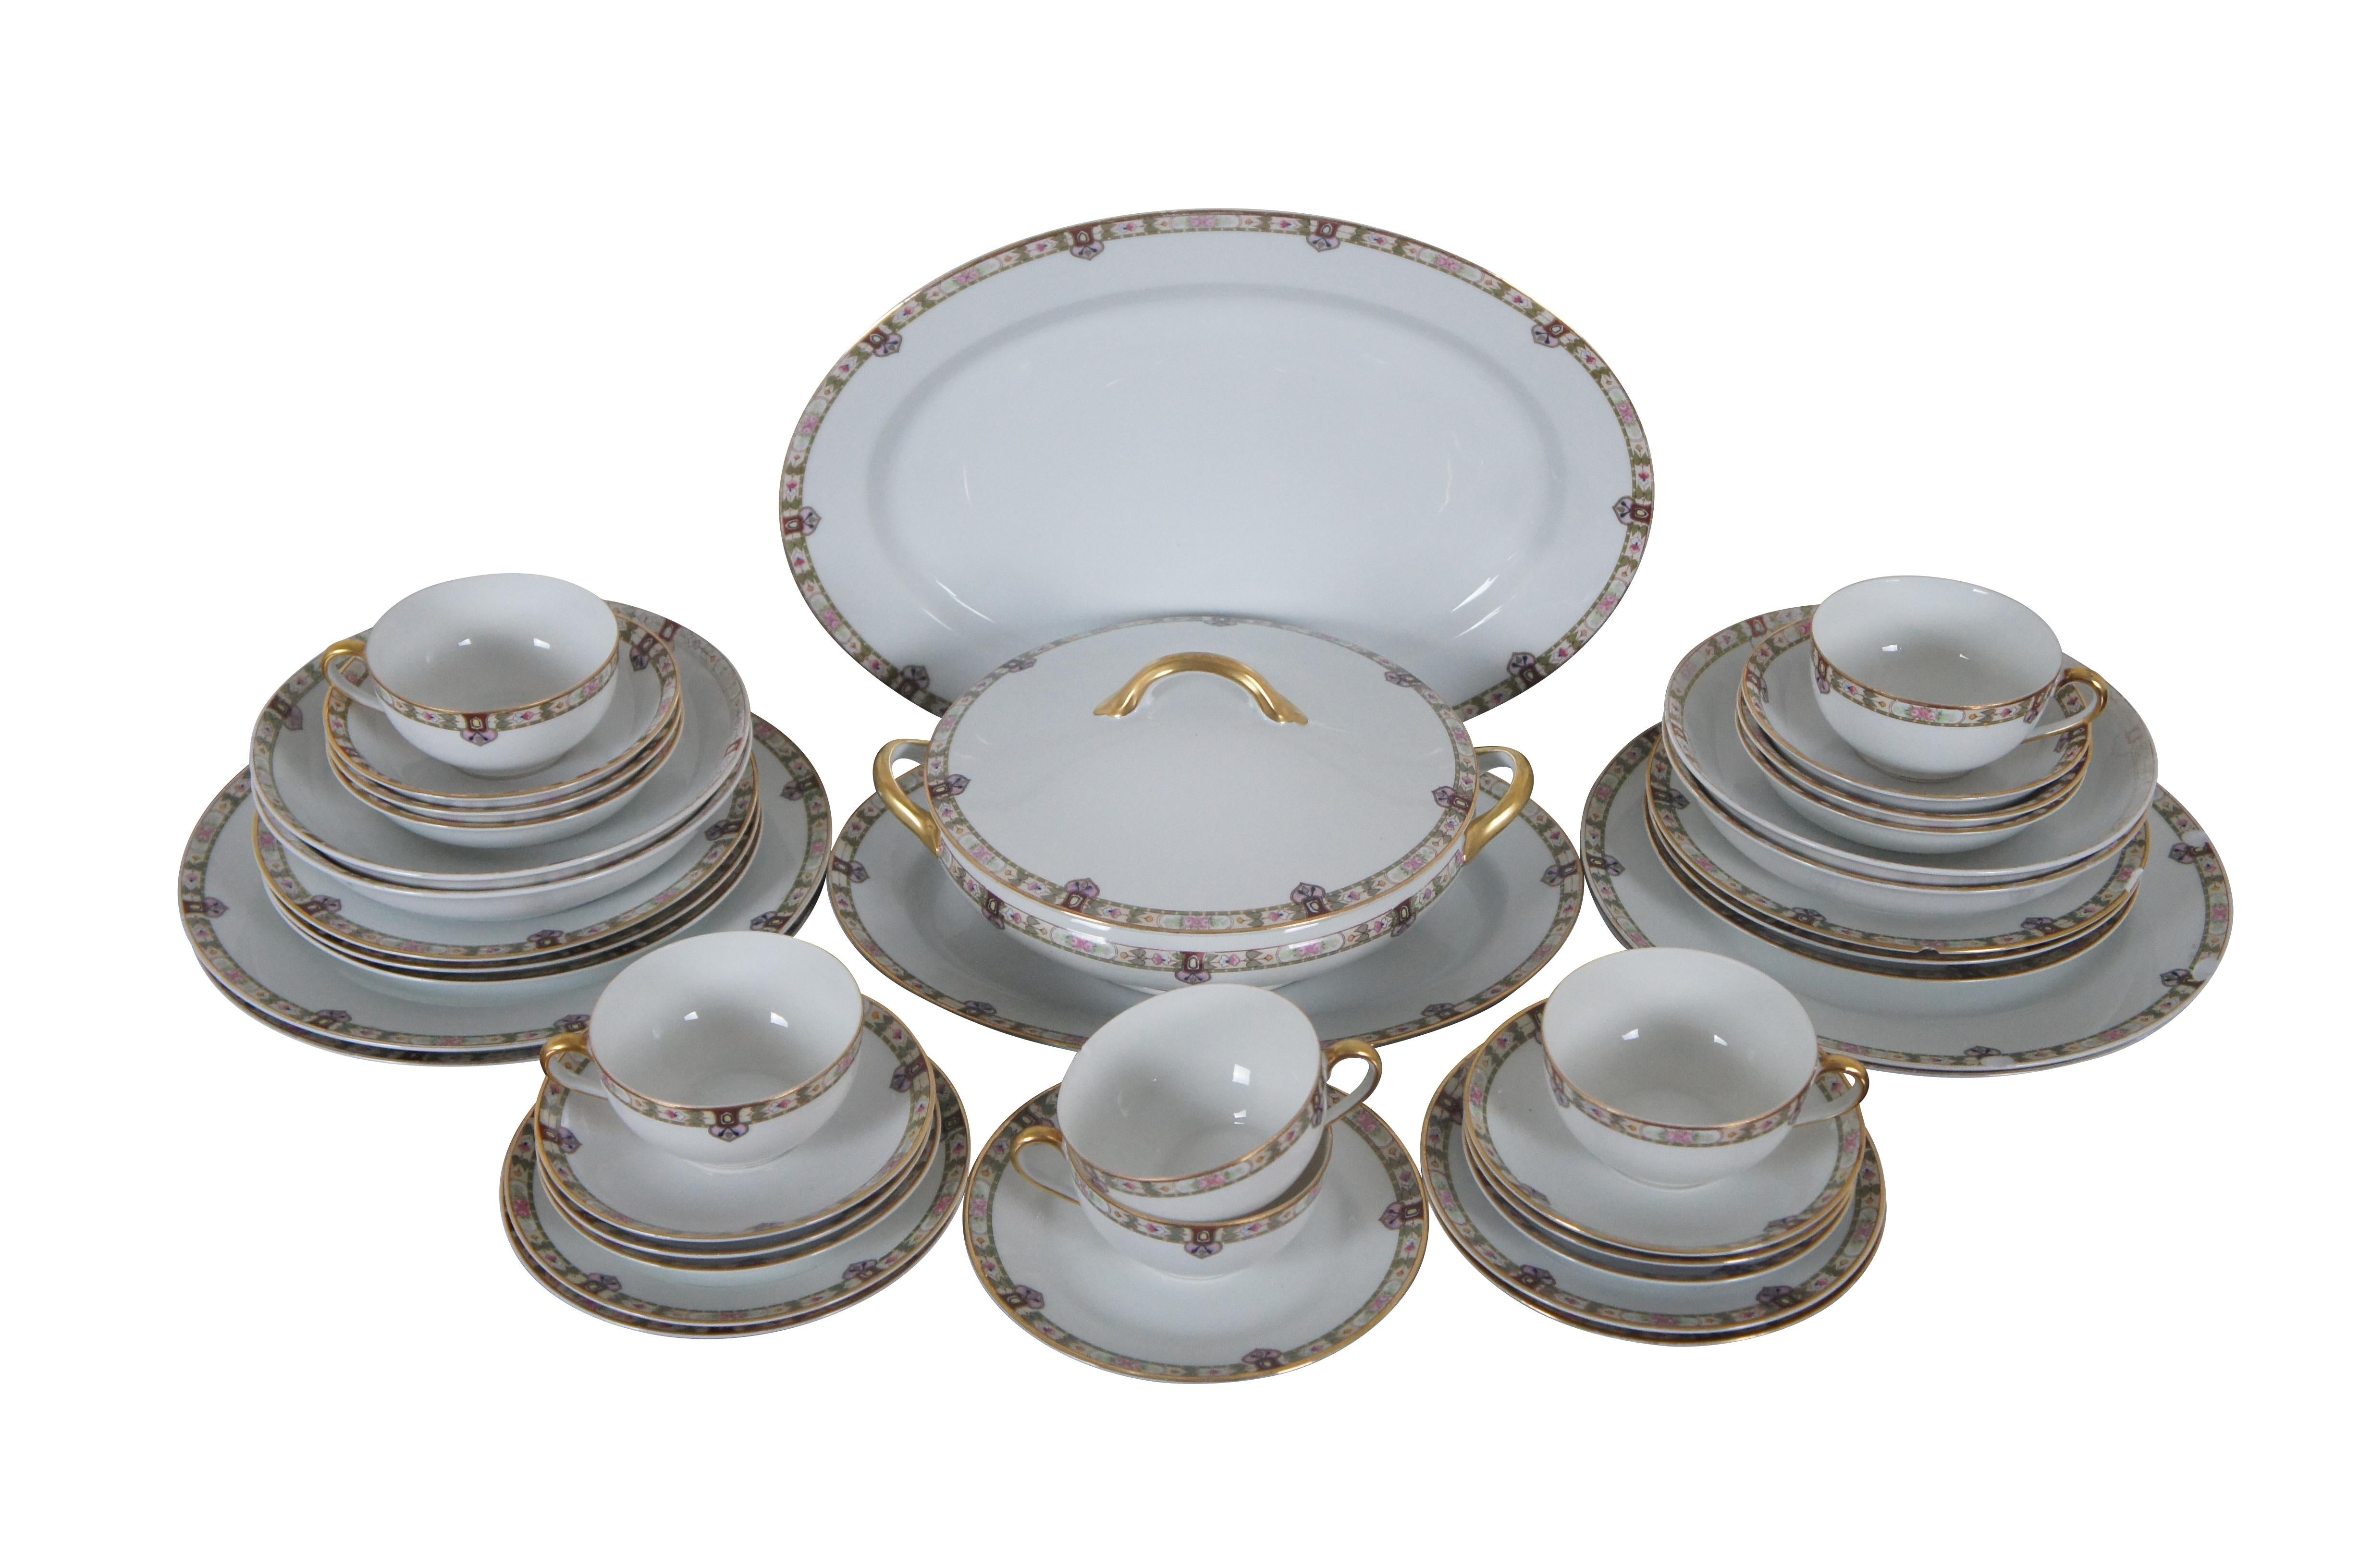 A lovely set of 41 pieces of mid 20th century fine china by Noritake, #13674. Features a Flower Band With Green & Cream.
Pattern: Regina by Noritake
Status: Discontinued. Circa: 1912 -

Dimensions:
Large Oval Platter - 14